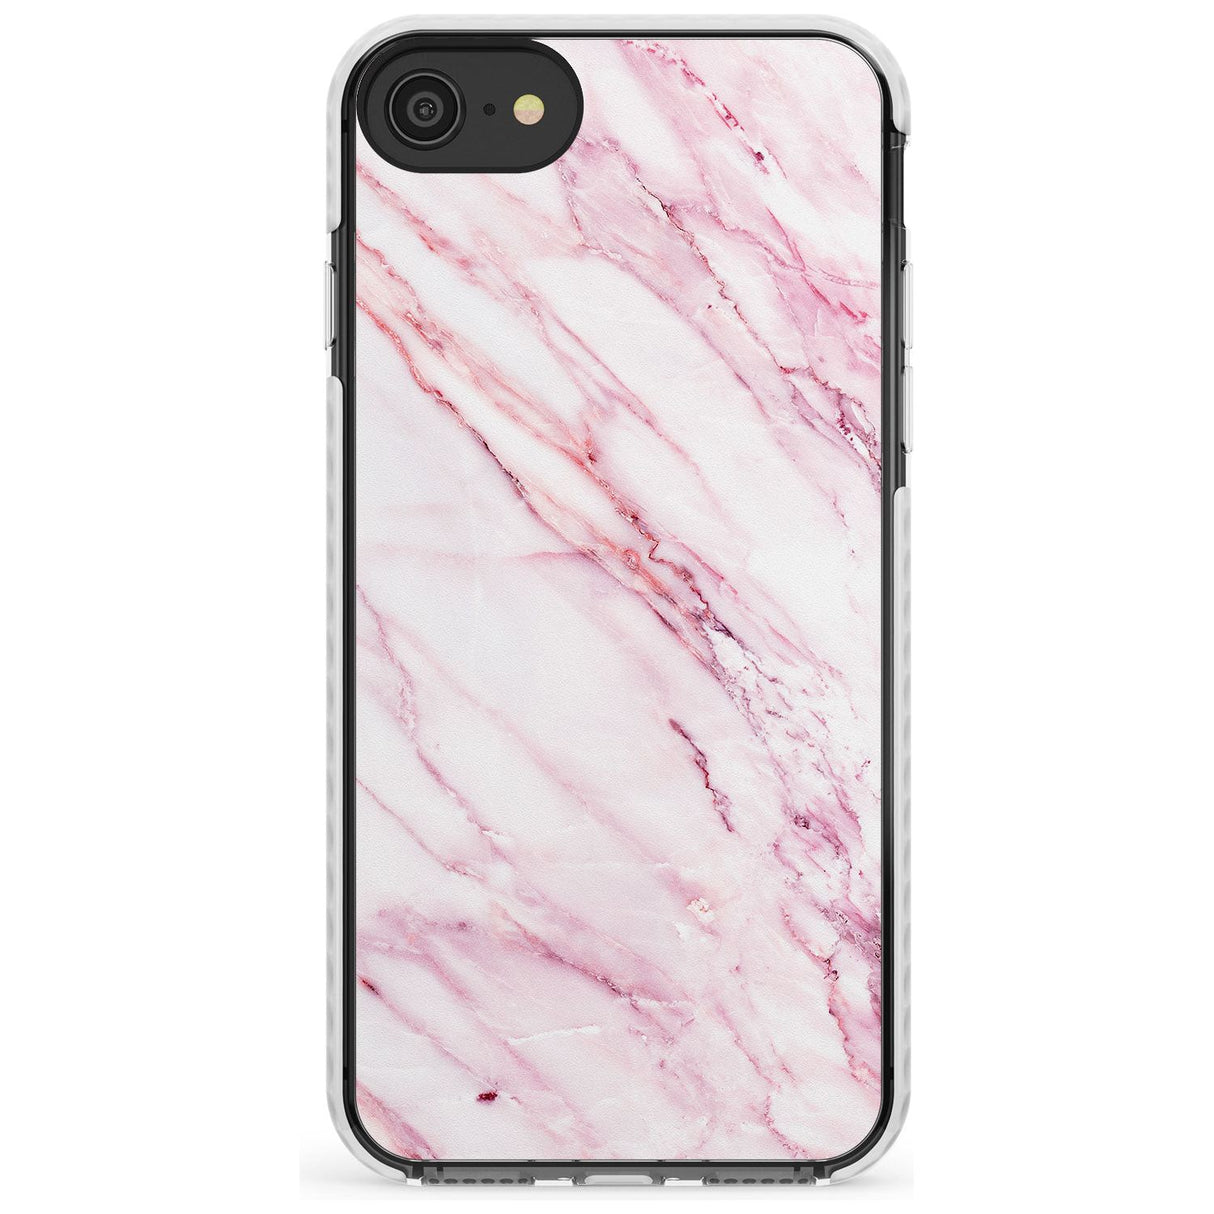 White & Pink Onyx Marble Texture Slim TPU Phone Case for iPhone SE 8 7 Plus